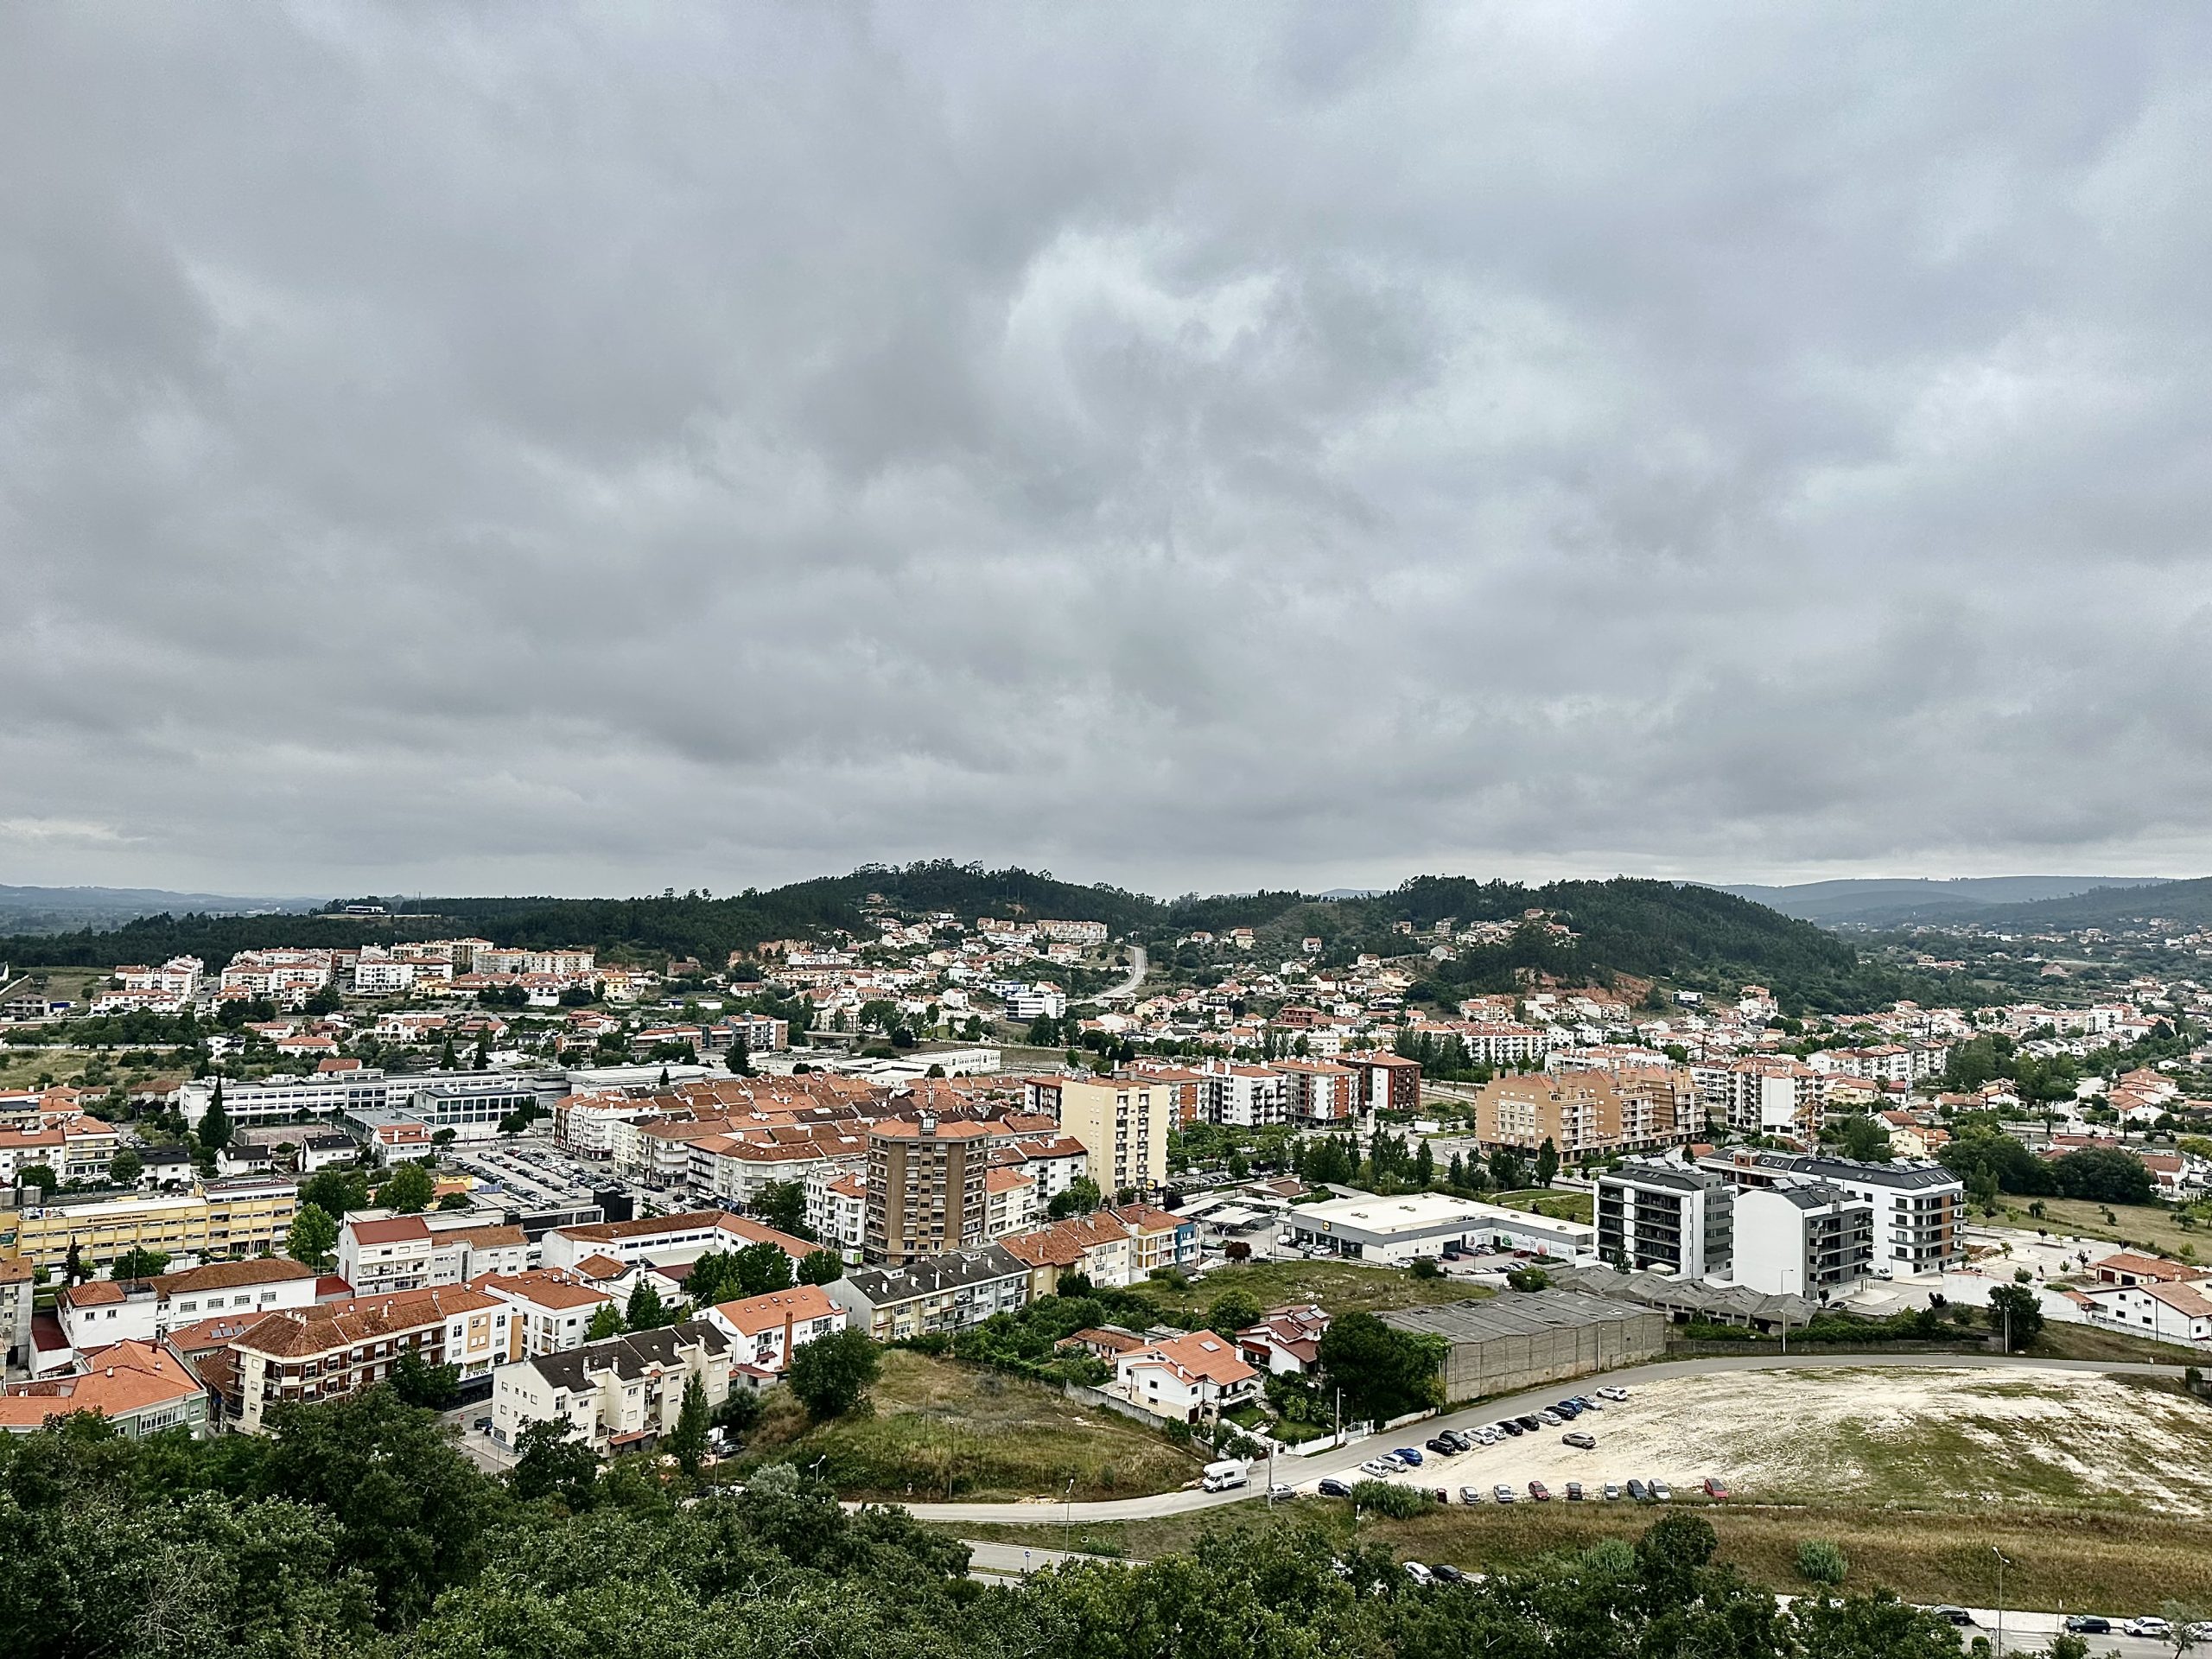 Pombal, Portugal